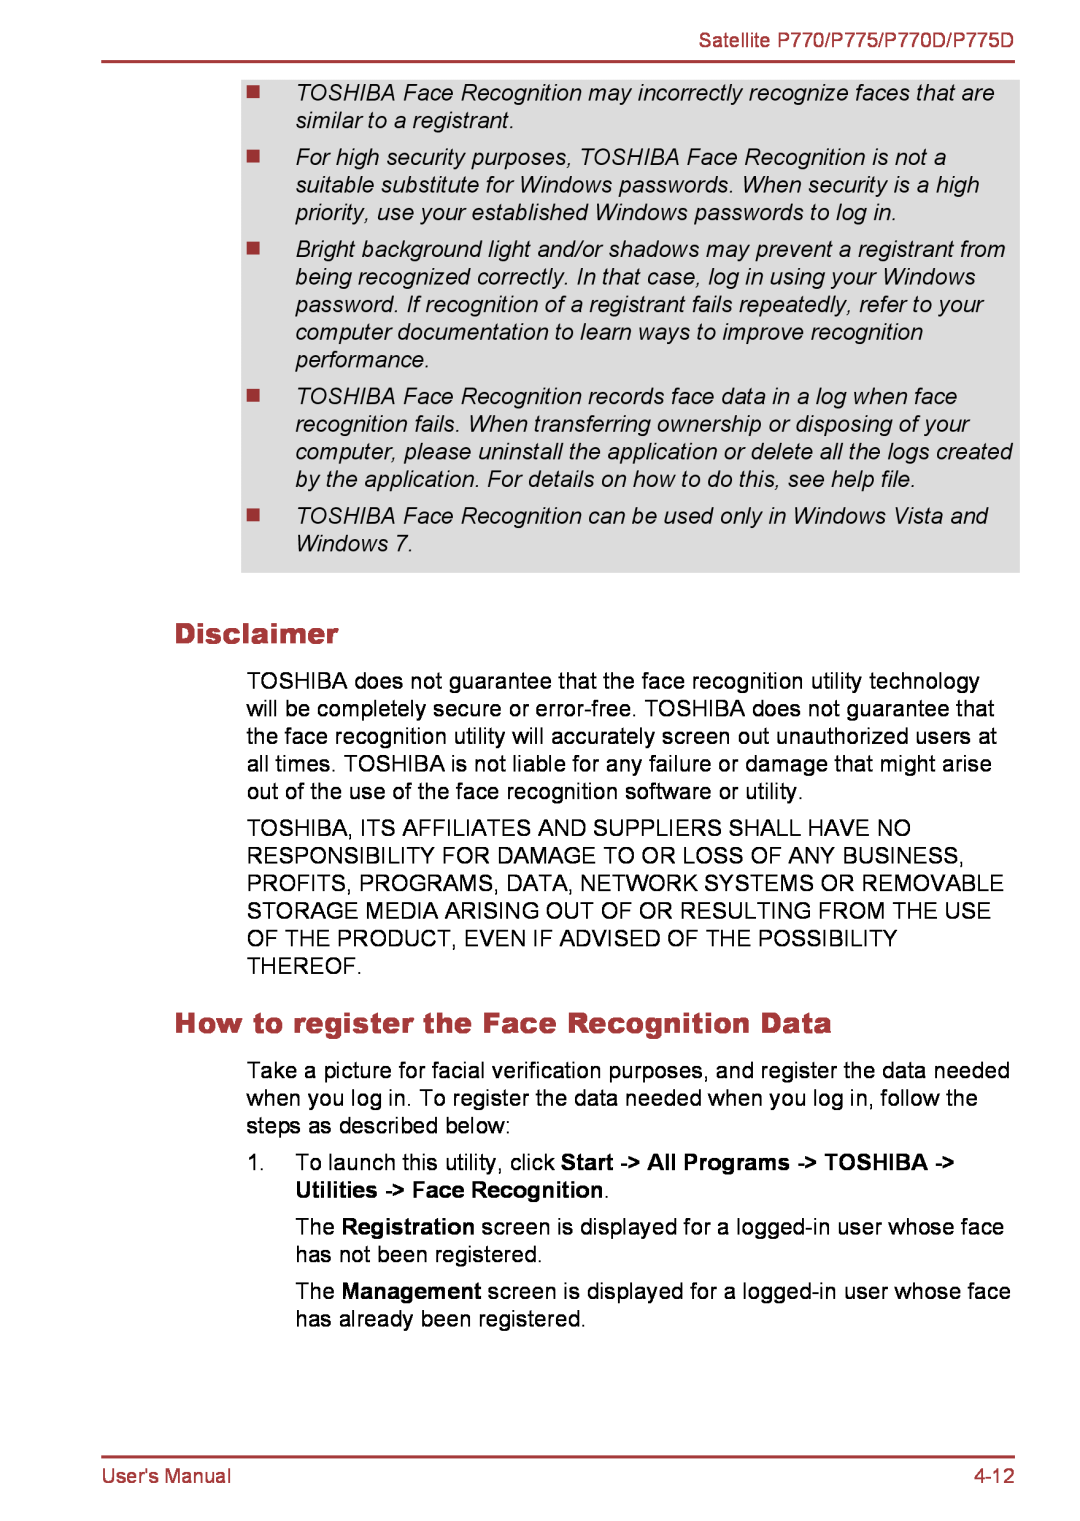 Toshiba P770 user manual How to register the Face Recognition Data, Disclaimer 